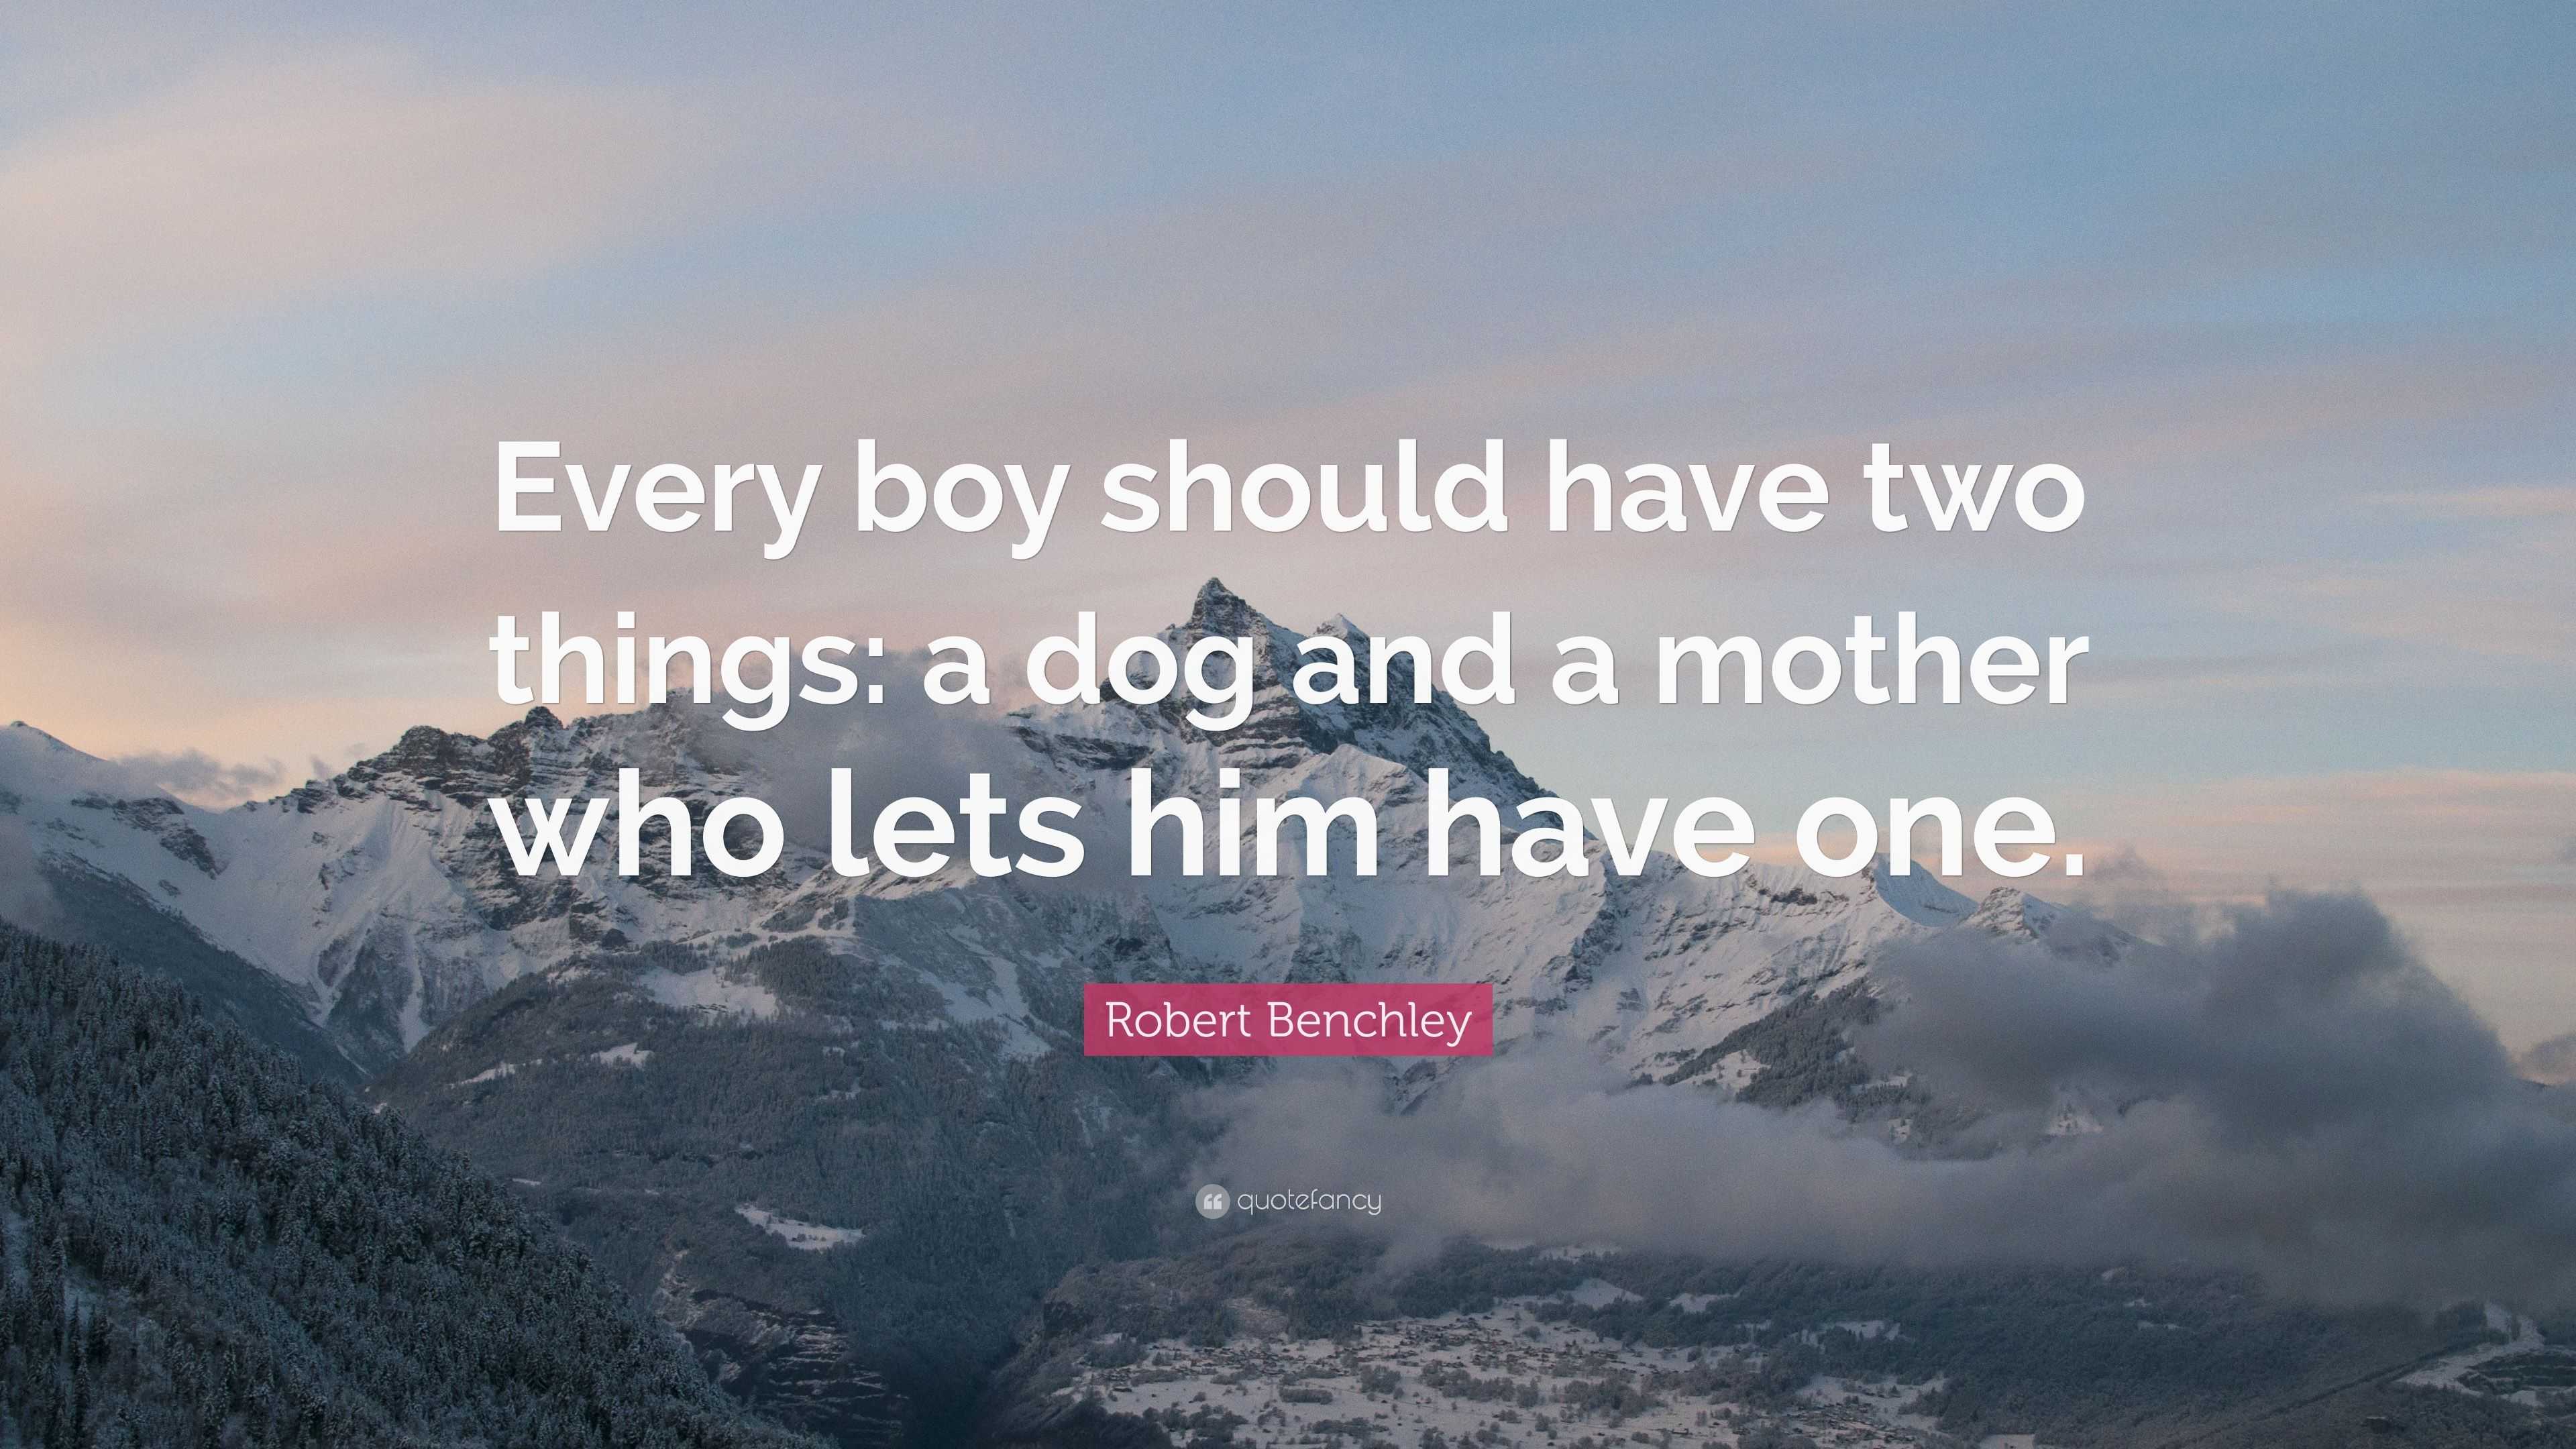 Every boy should have two things: A dog and a family willing to